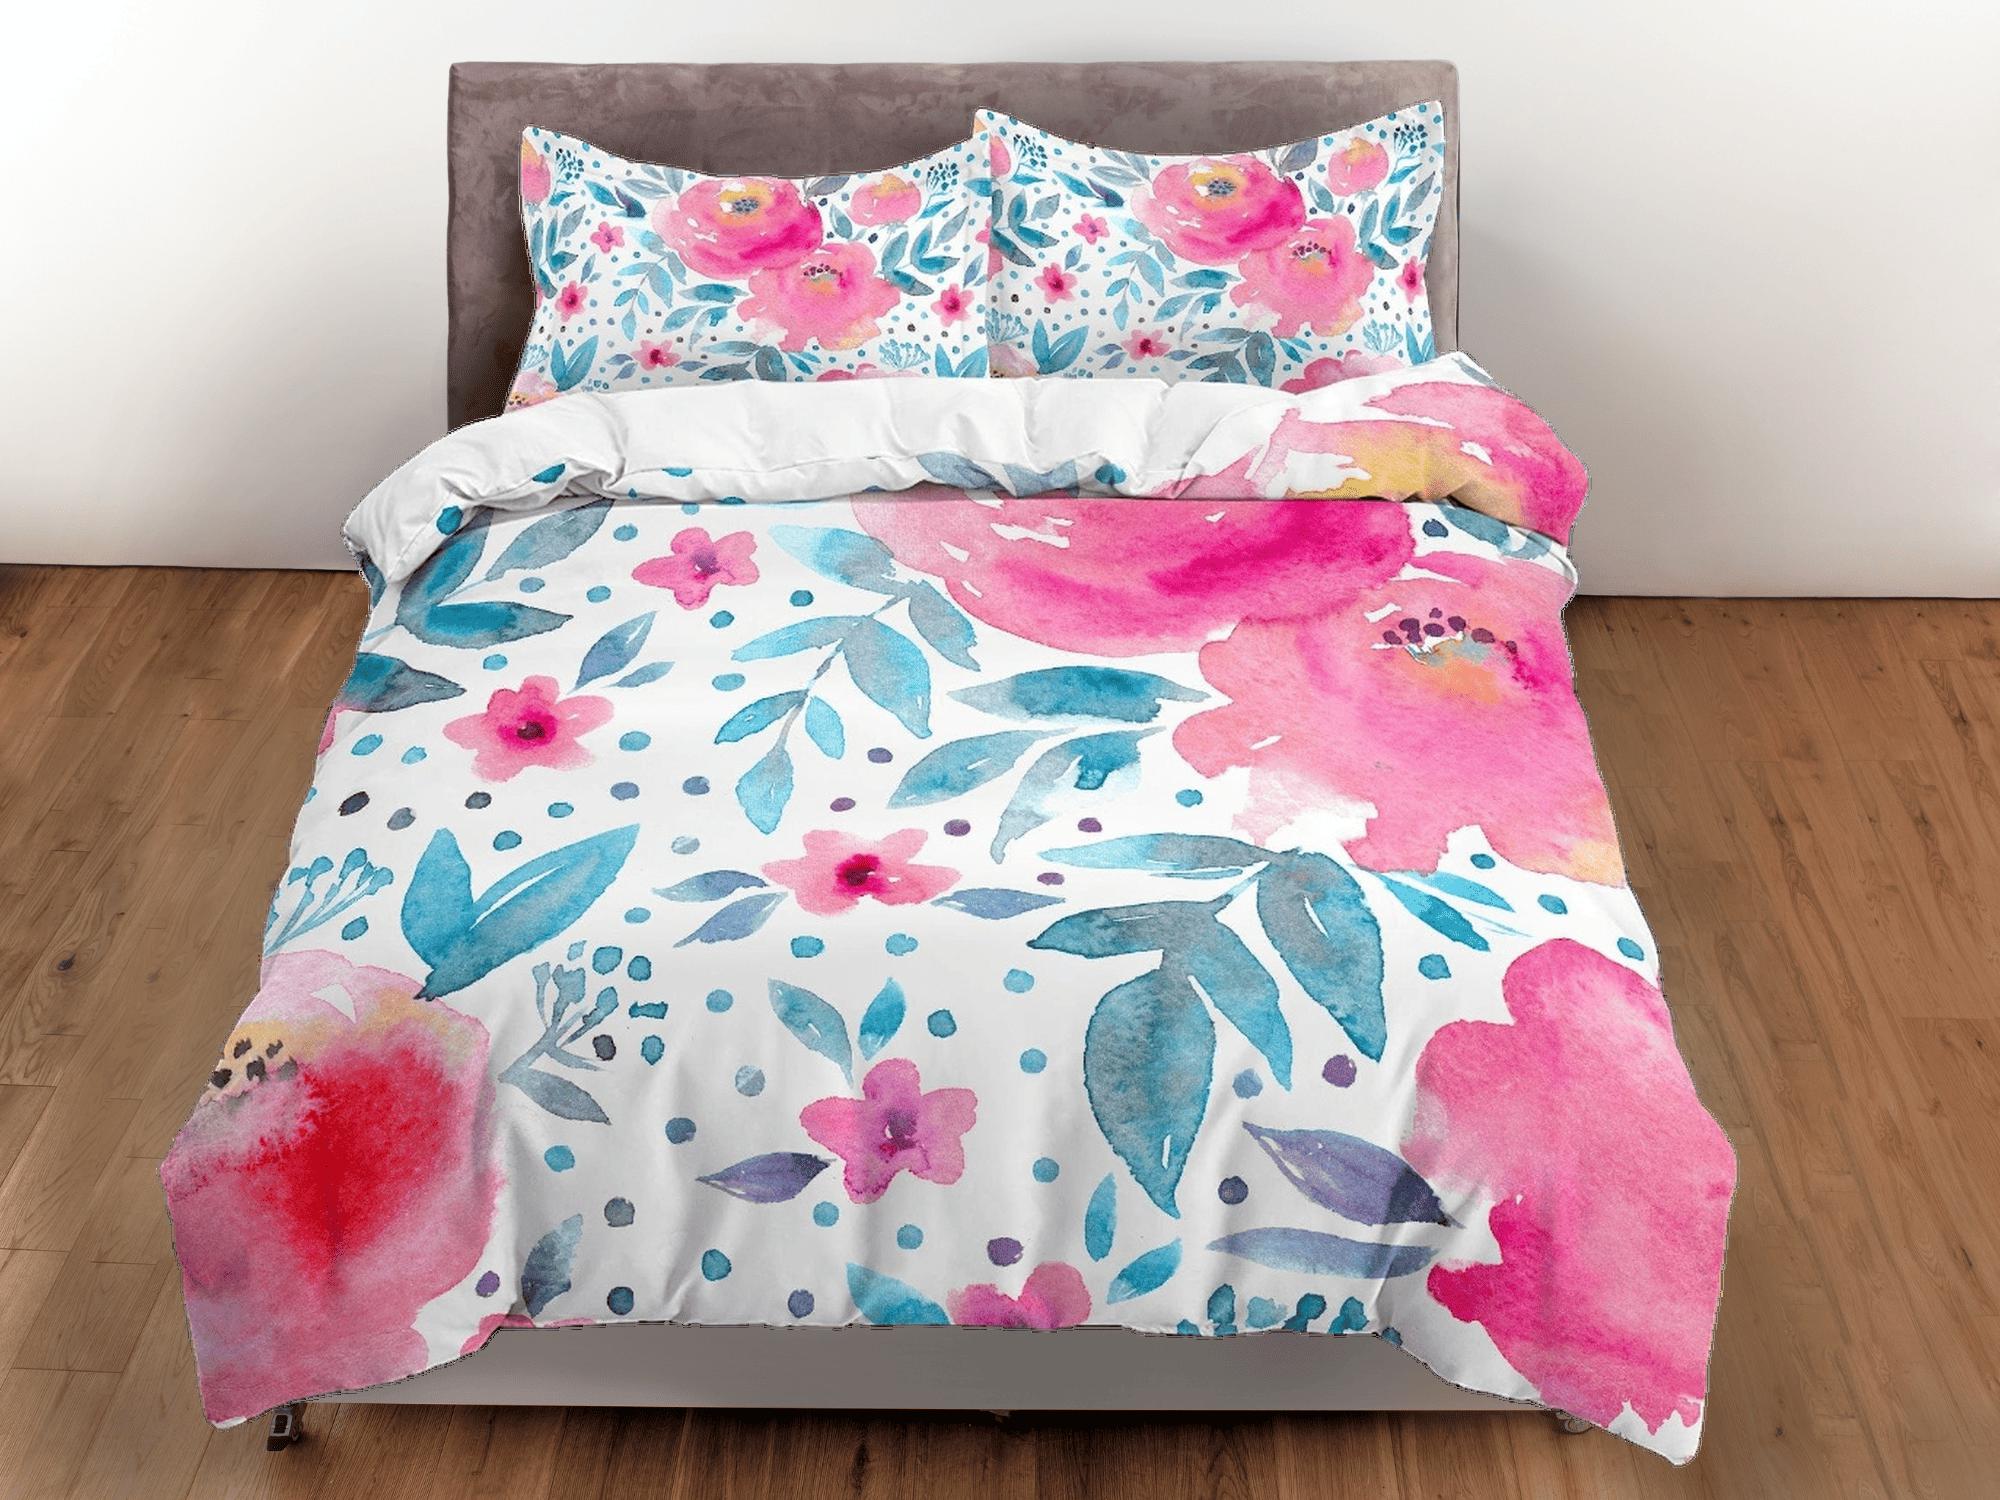 daintyduvet Pink floral painted duvet cover colorful bedding, teen girl bedroom, baby girl crib bedding boho maximalist bedspread aesthetic bedding